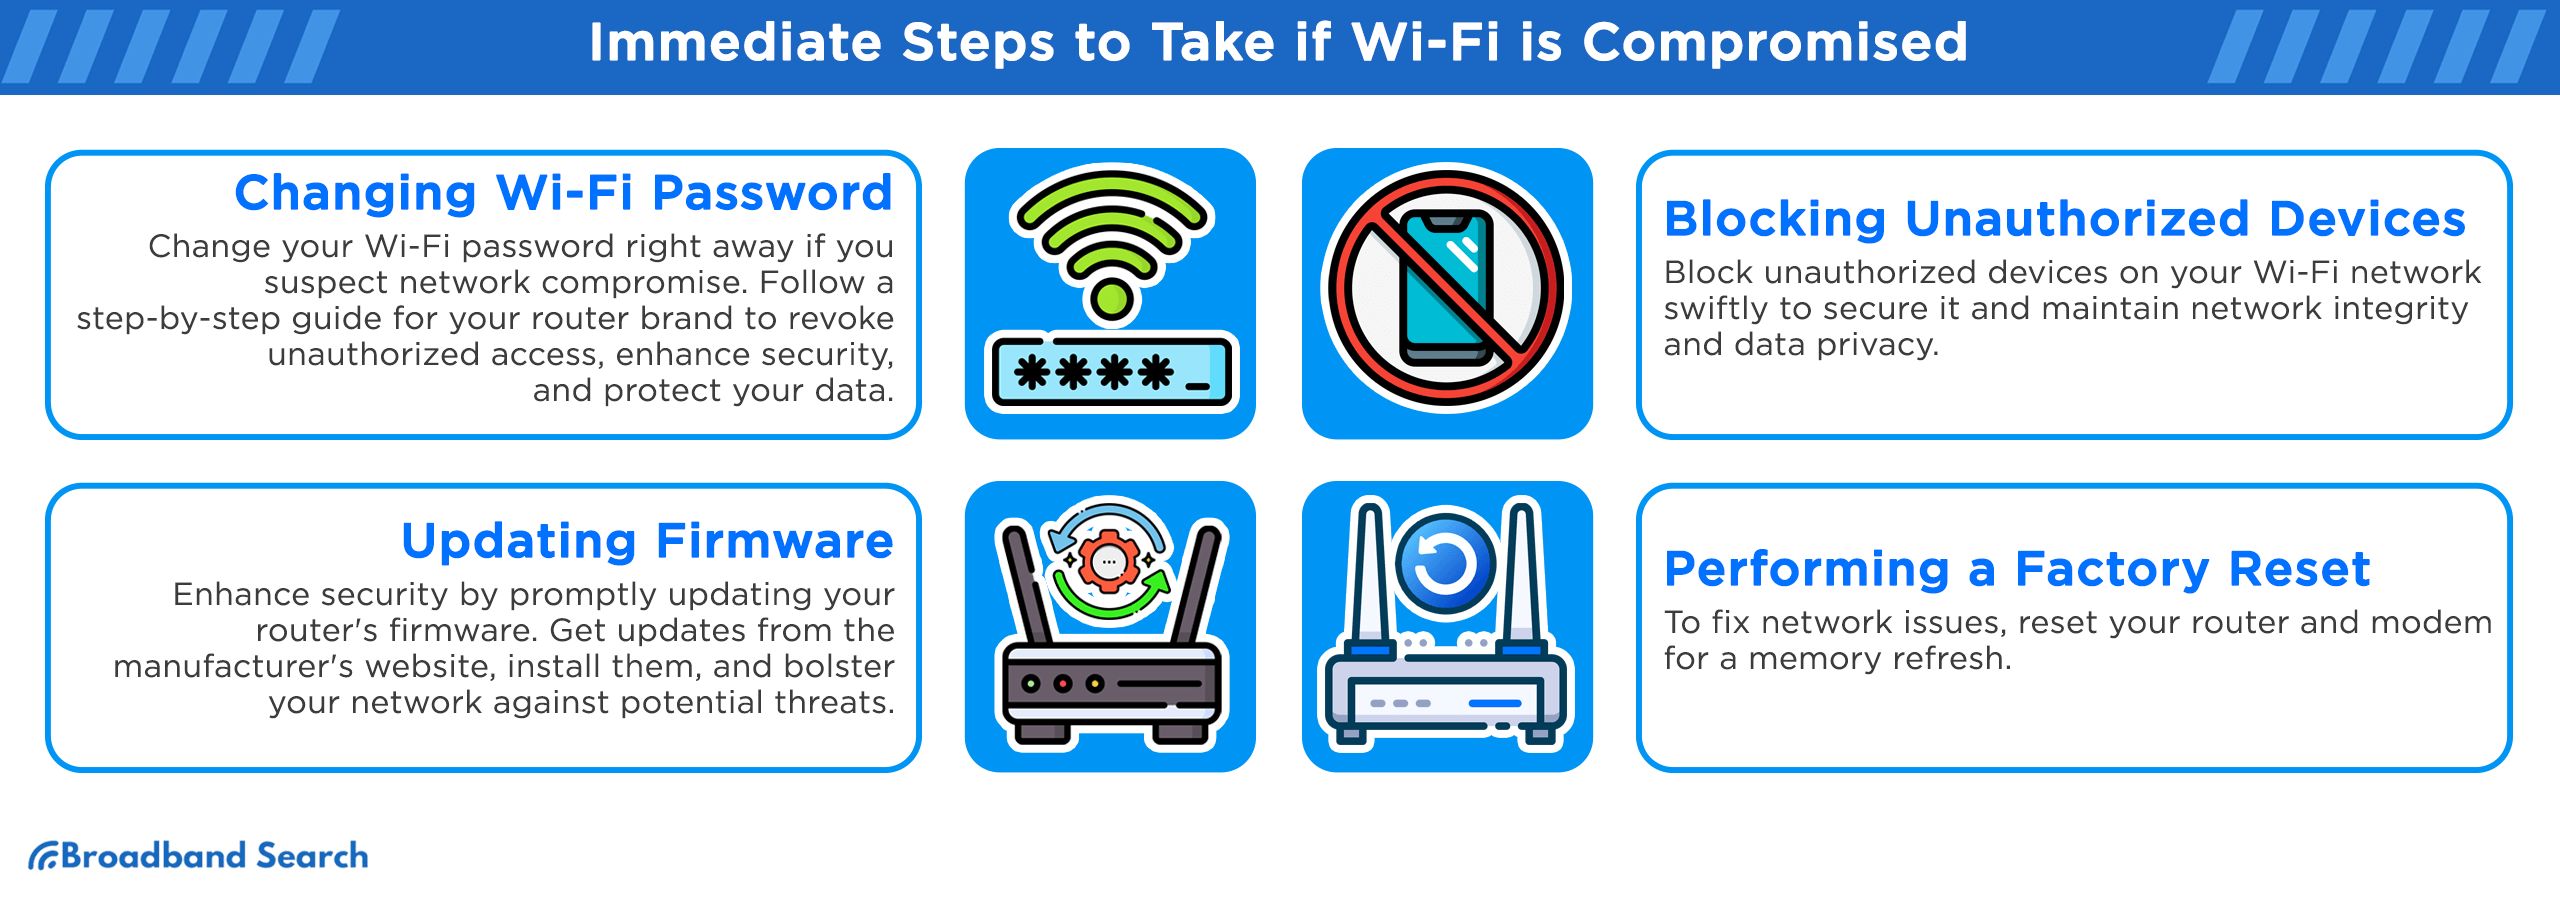 immediate steps to take if wi-fi is compromised